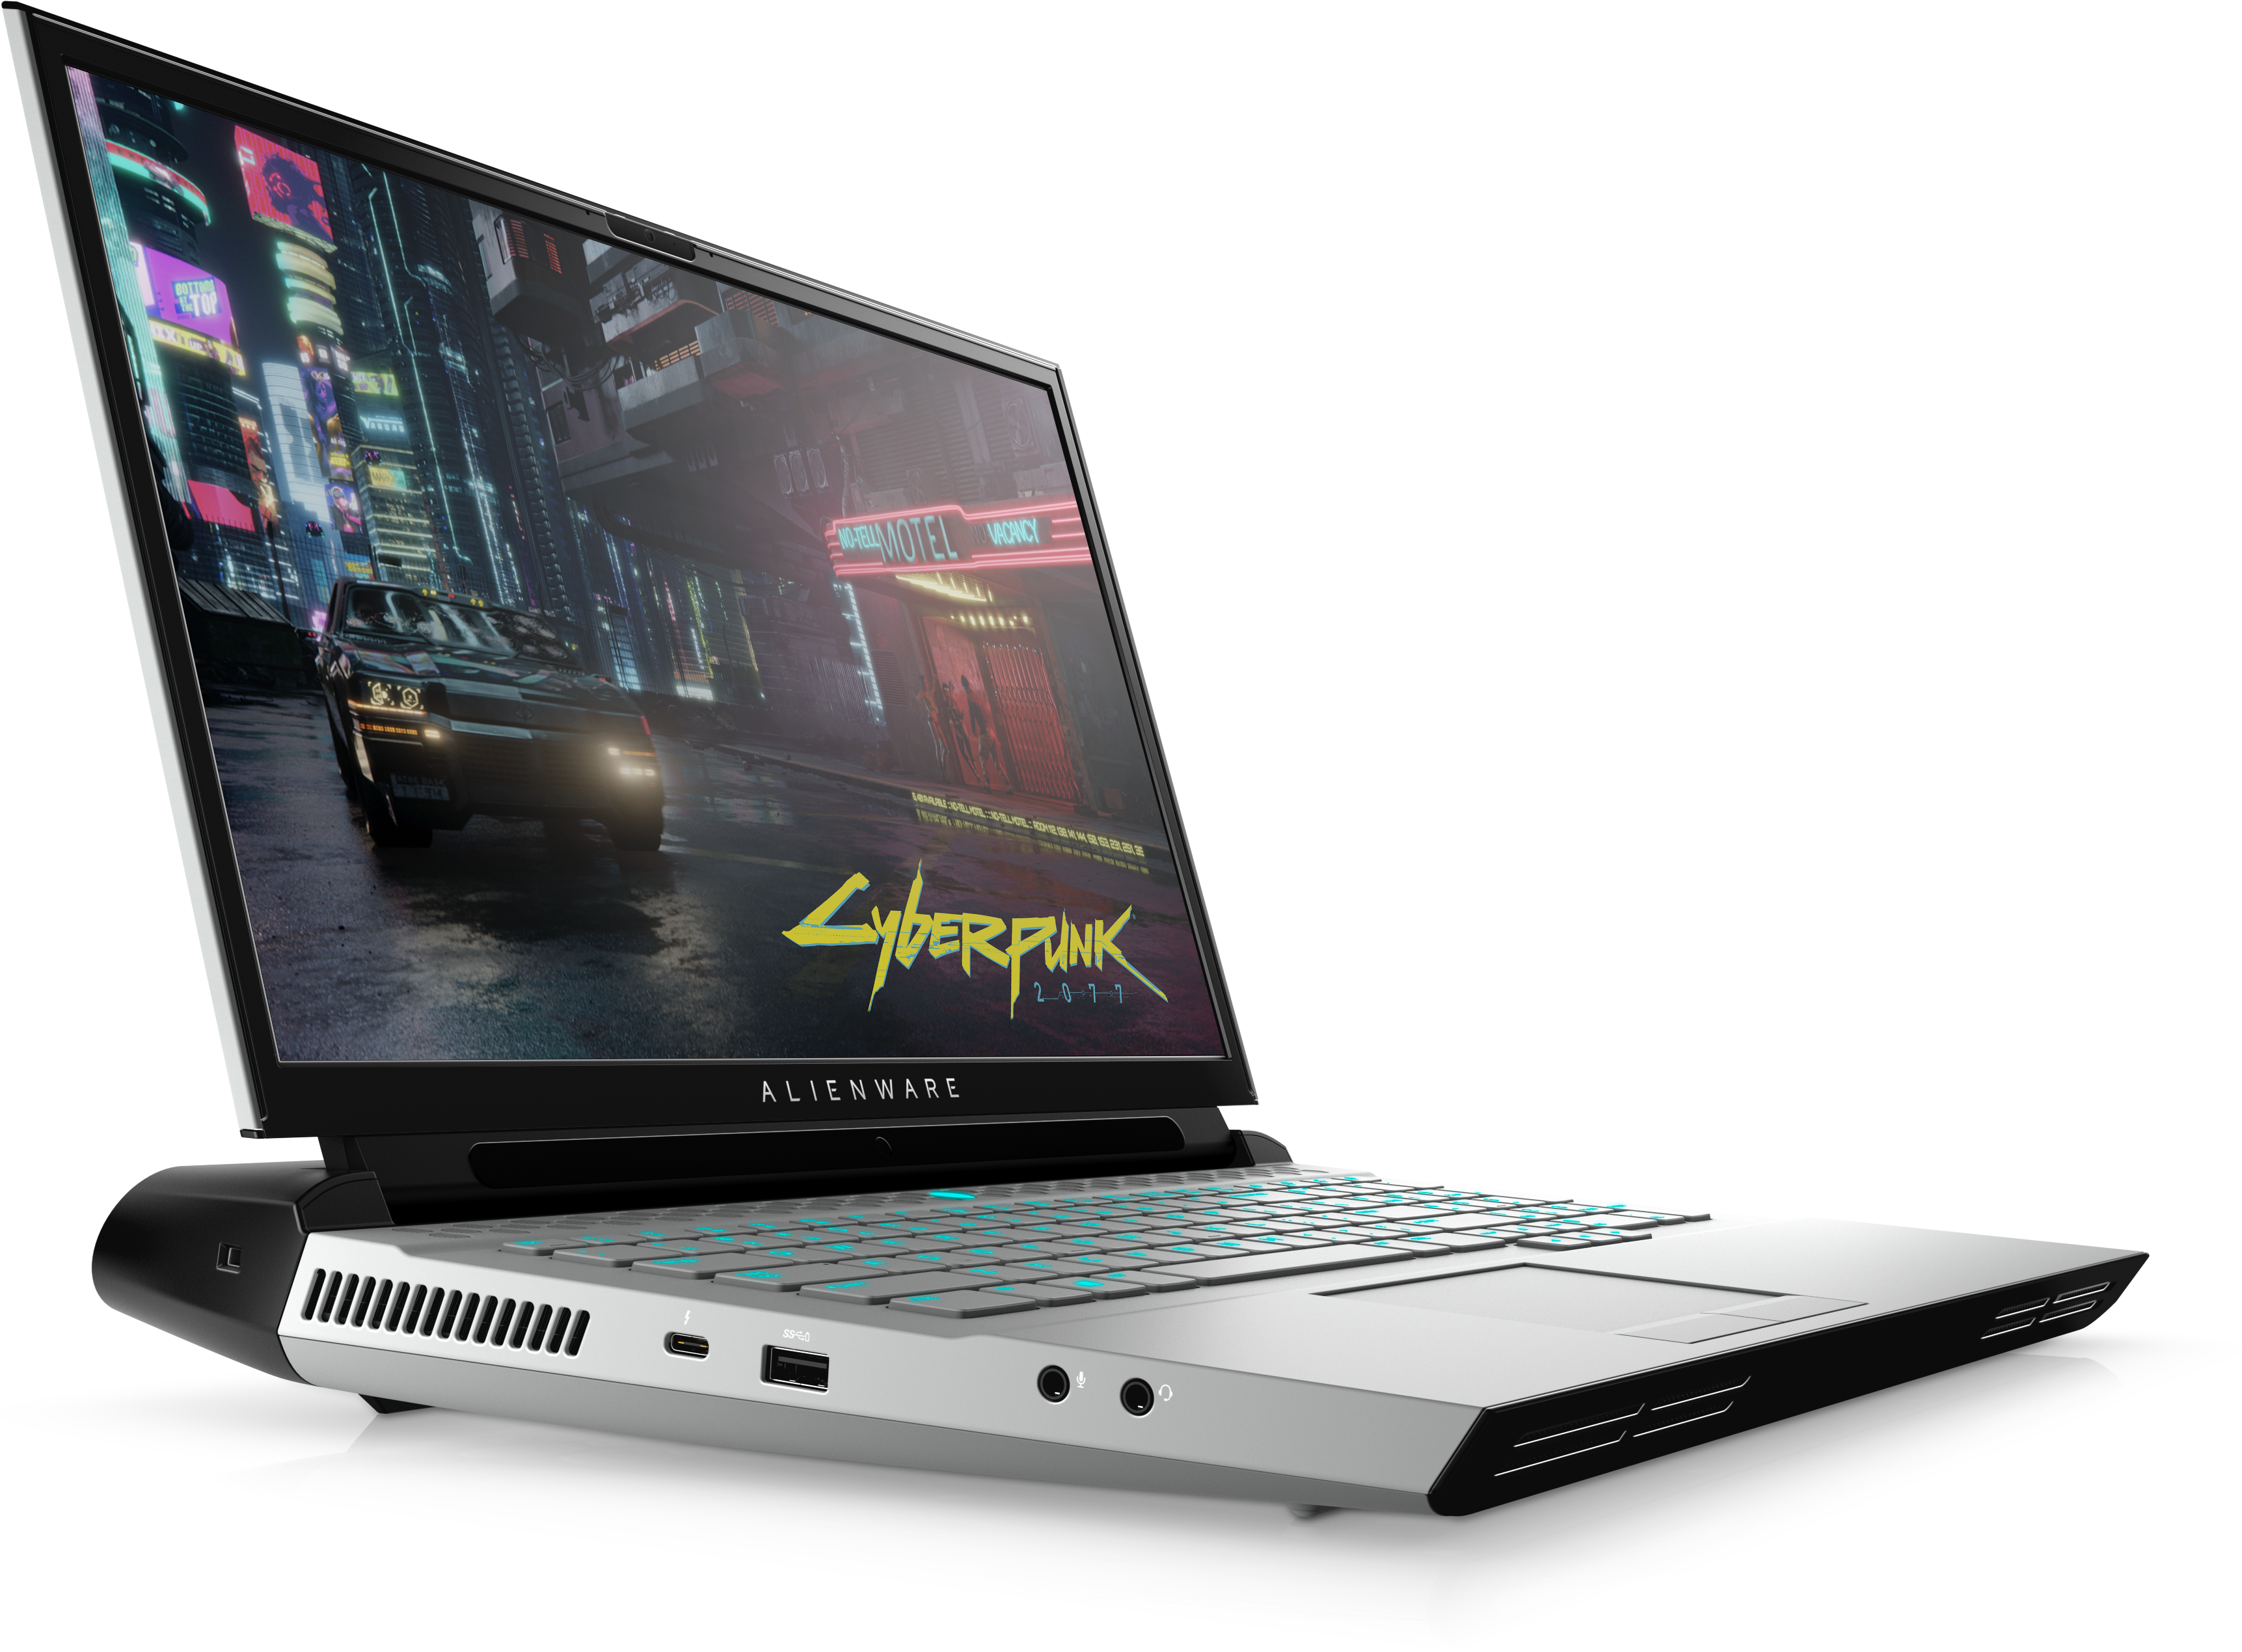 Dell Alienware Area 51m R2 Lands With Up To Core I9 Comet Lake S Processors An Nvidia Geforce Rtx 2080 Super 64 Gb Of Ram 4 Tb Of Storage A 300 Hz Ips Display